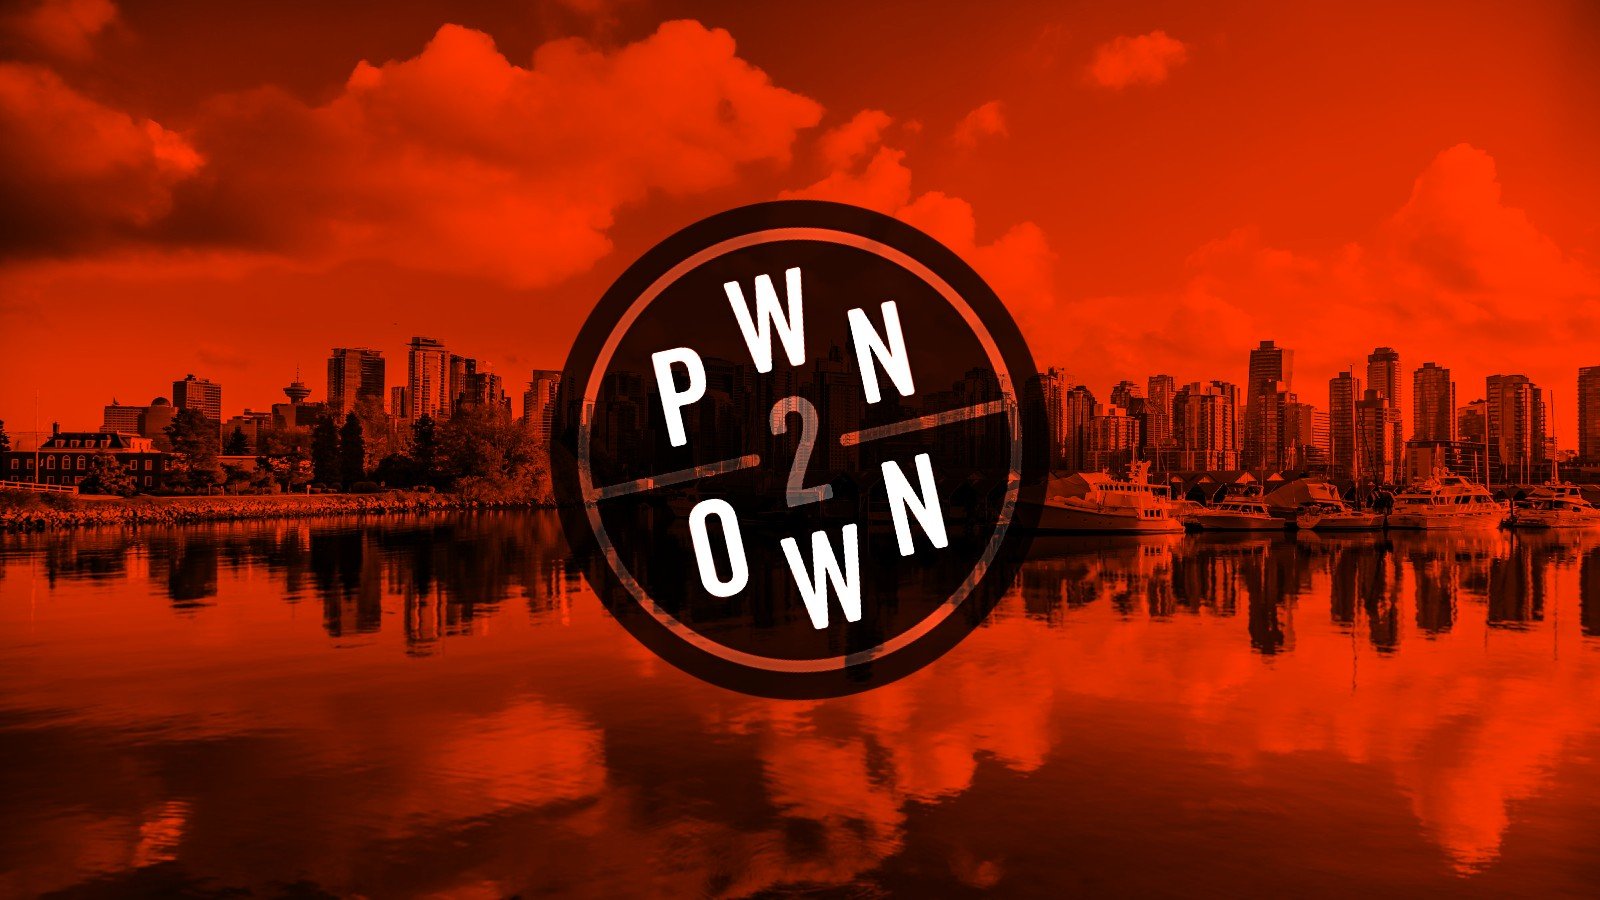 hackers-earn-$1,132,500-for-29-zero-days-at-pwn2own-vancouver-–-source:-wwwbleepingcomputer.com